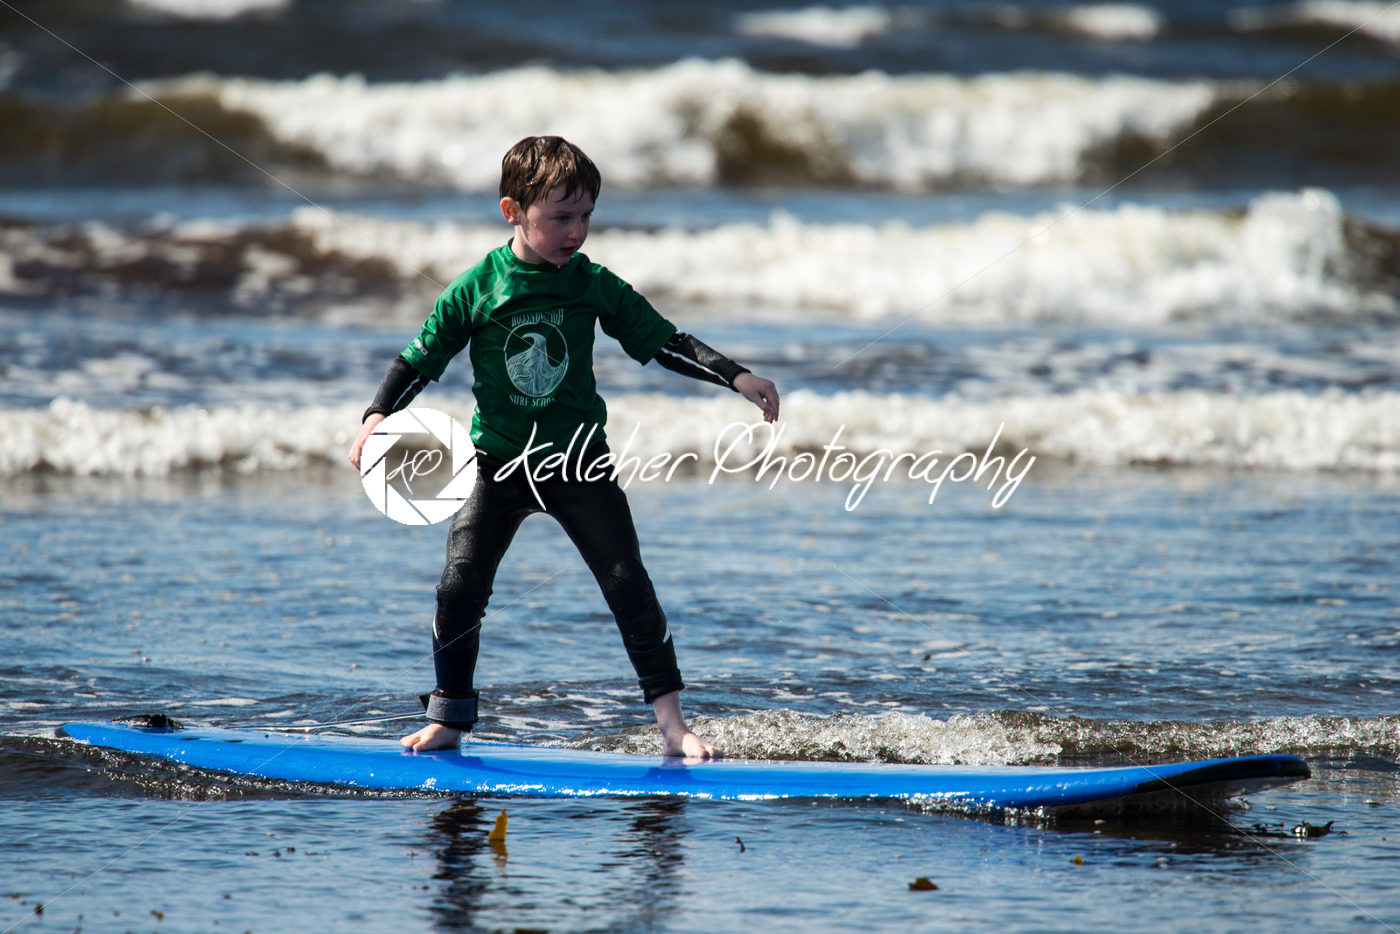 Young little boy on beach taking surfing lessons - Kelleher Photography Store